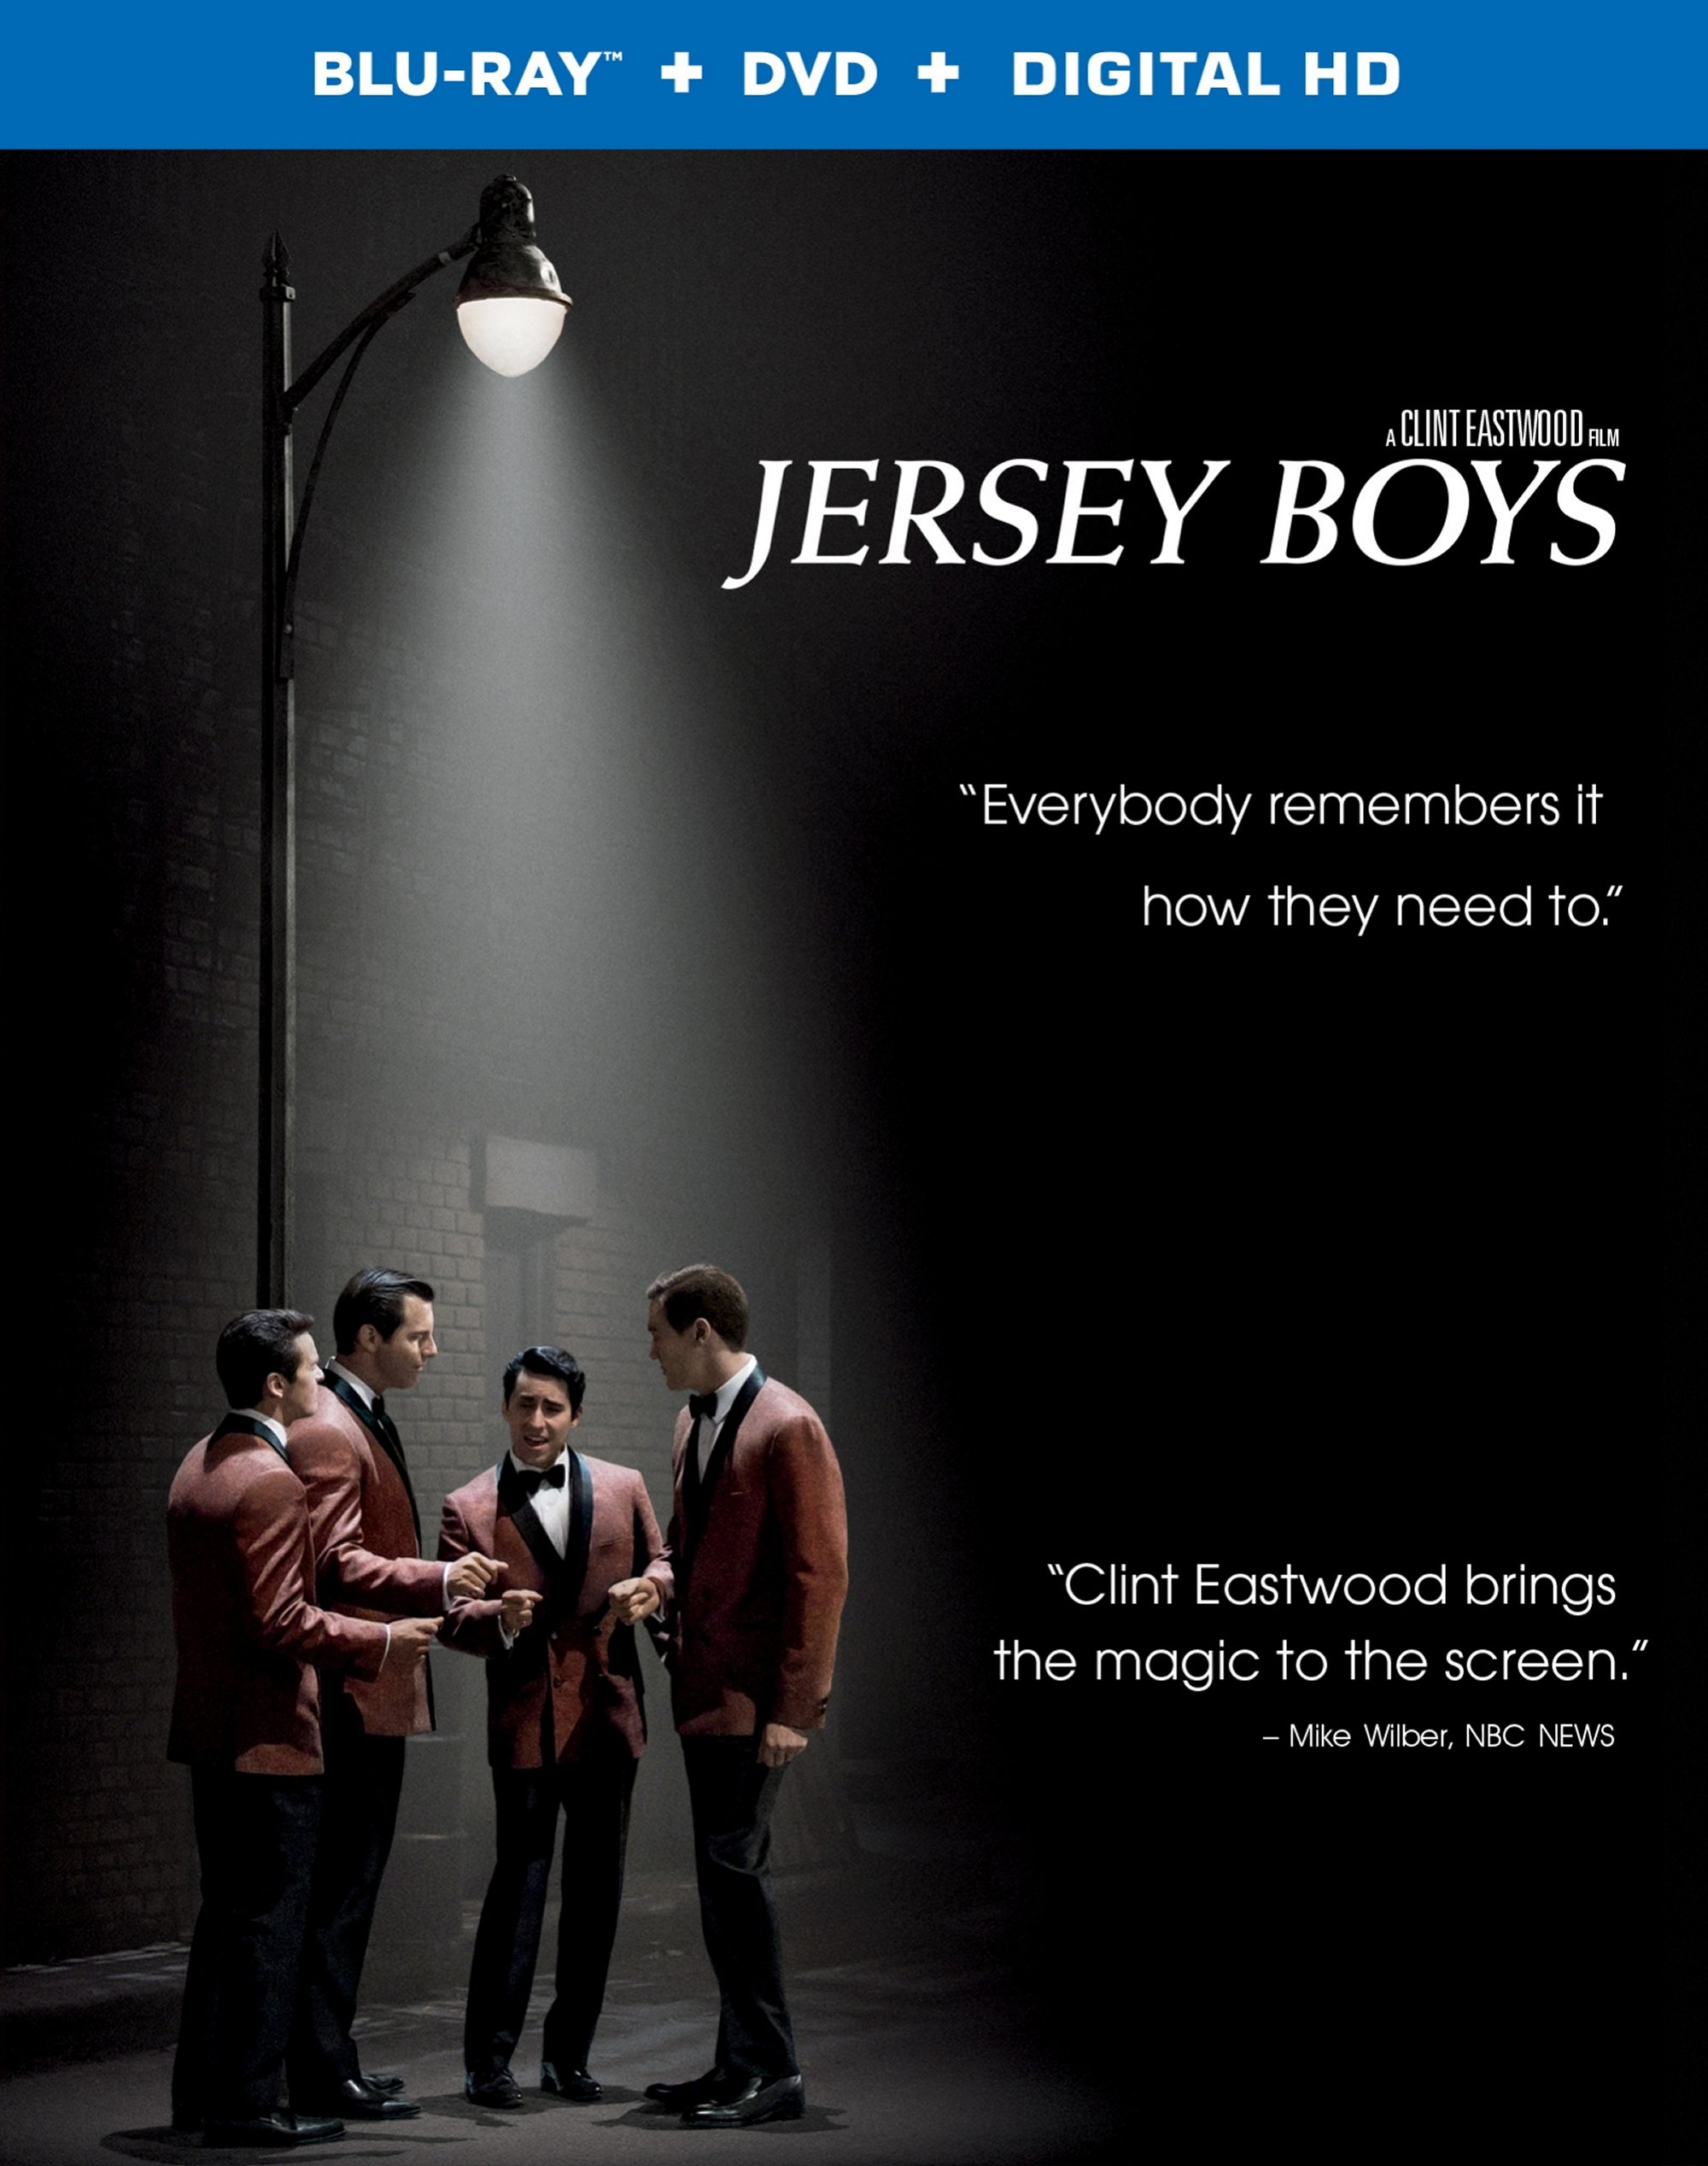 Jersey Boys Blu-ray Review